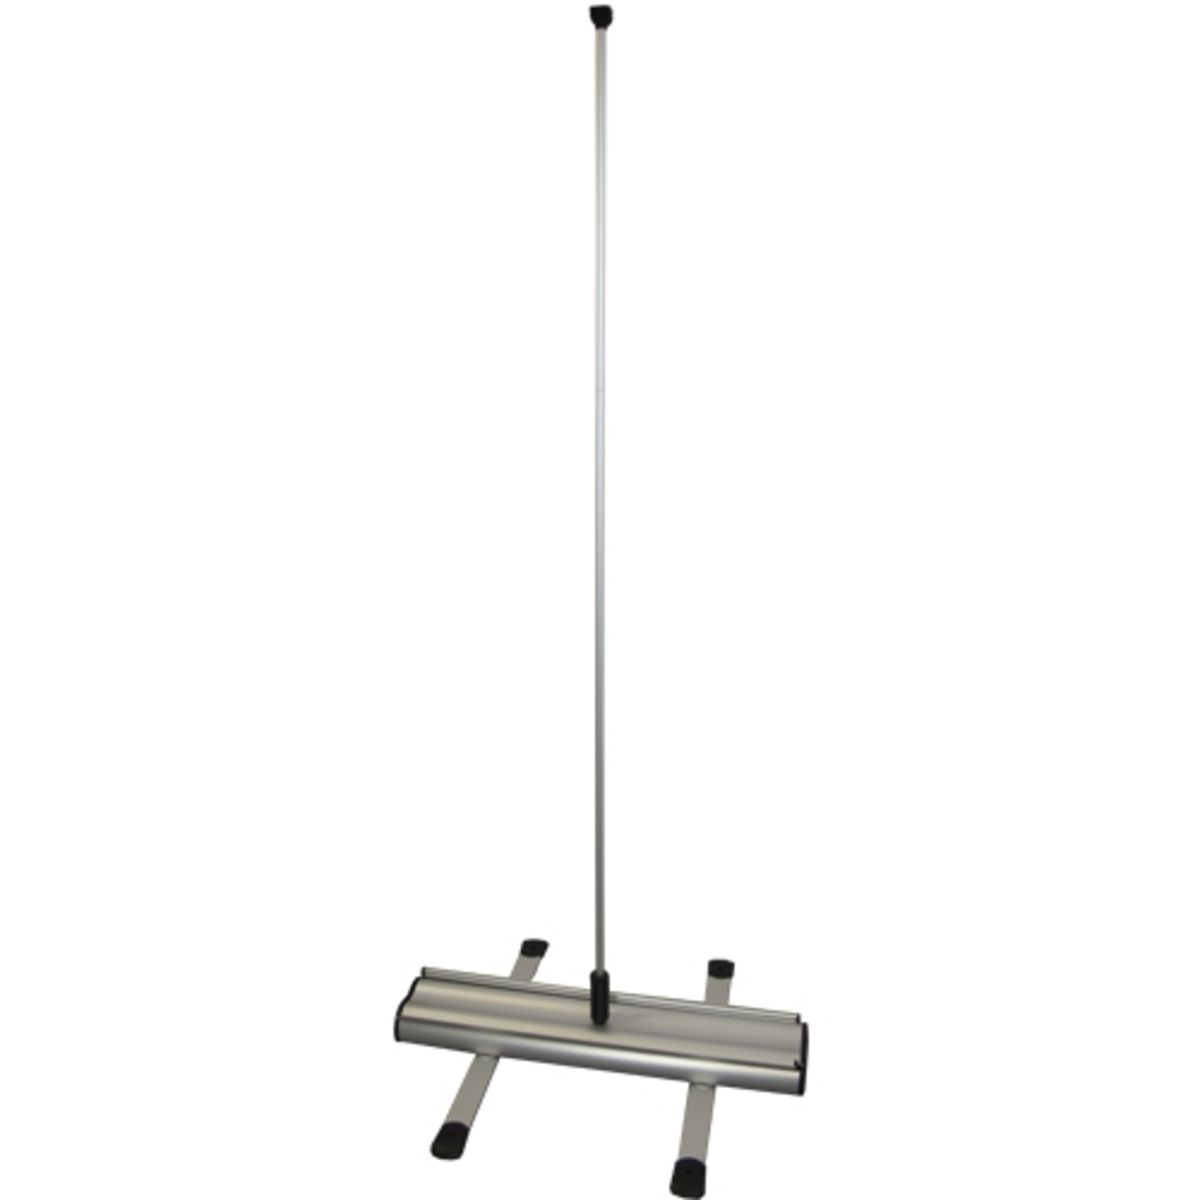 Outdoor-roller-banner-pole-system.png